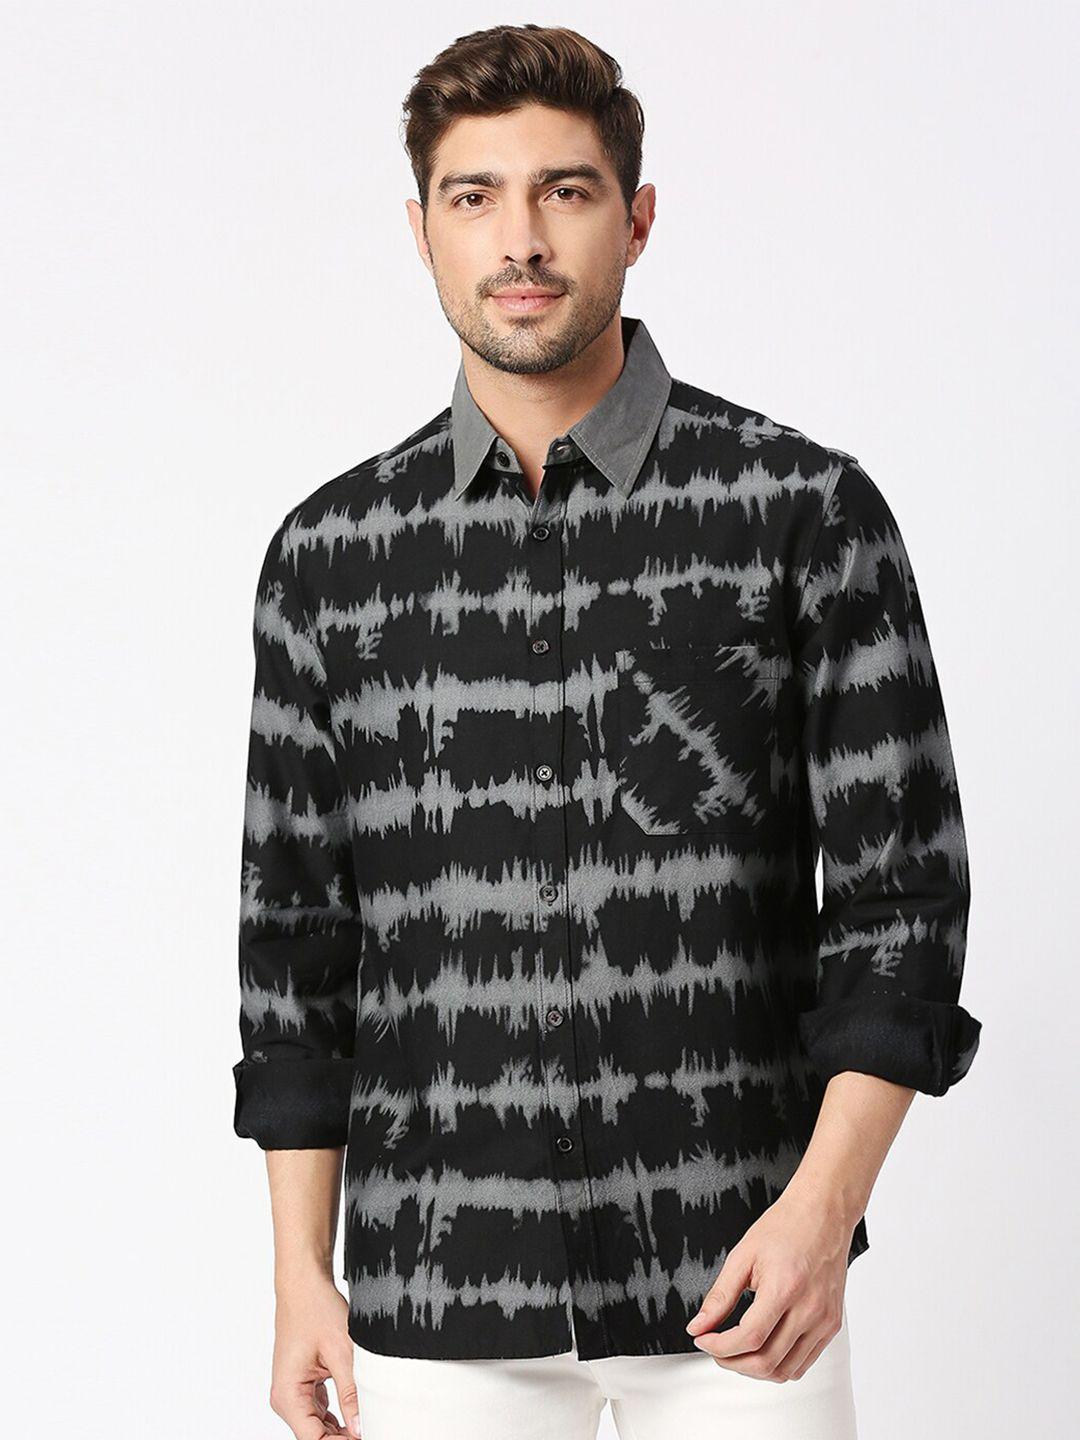 blamblack relaxed abstract printed spread collar casual shirt